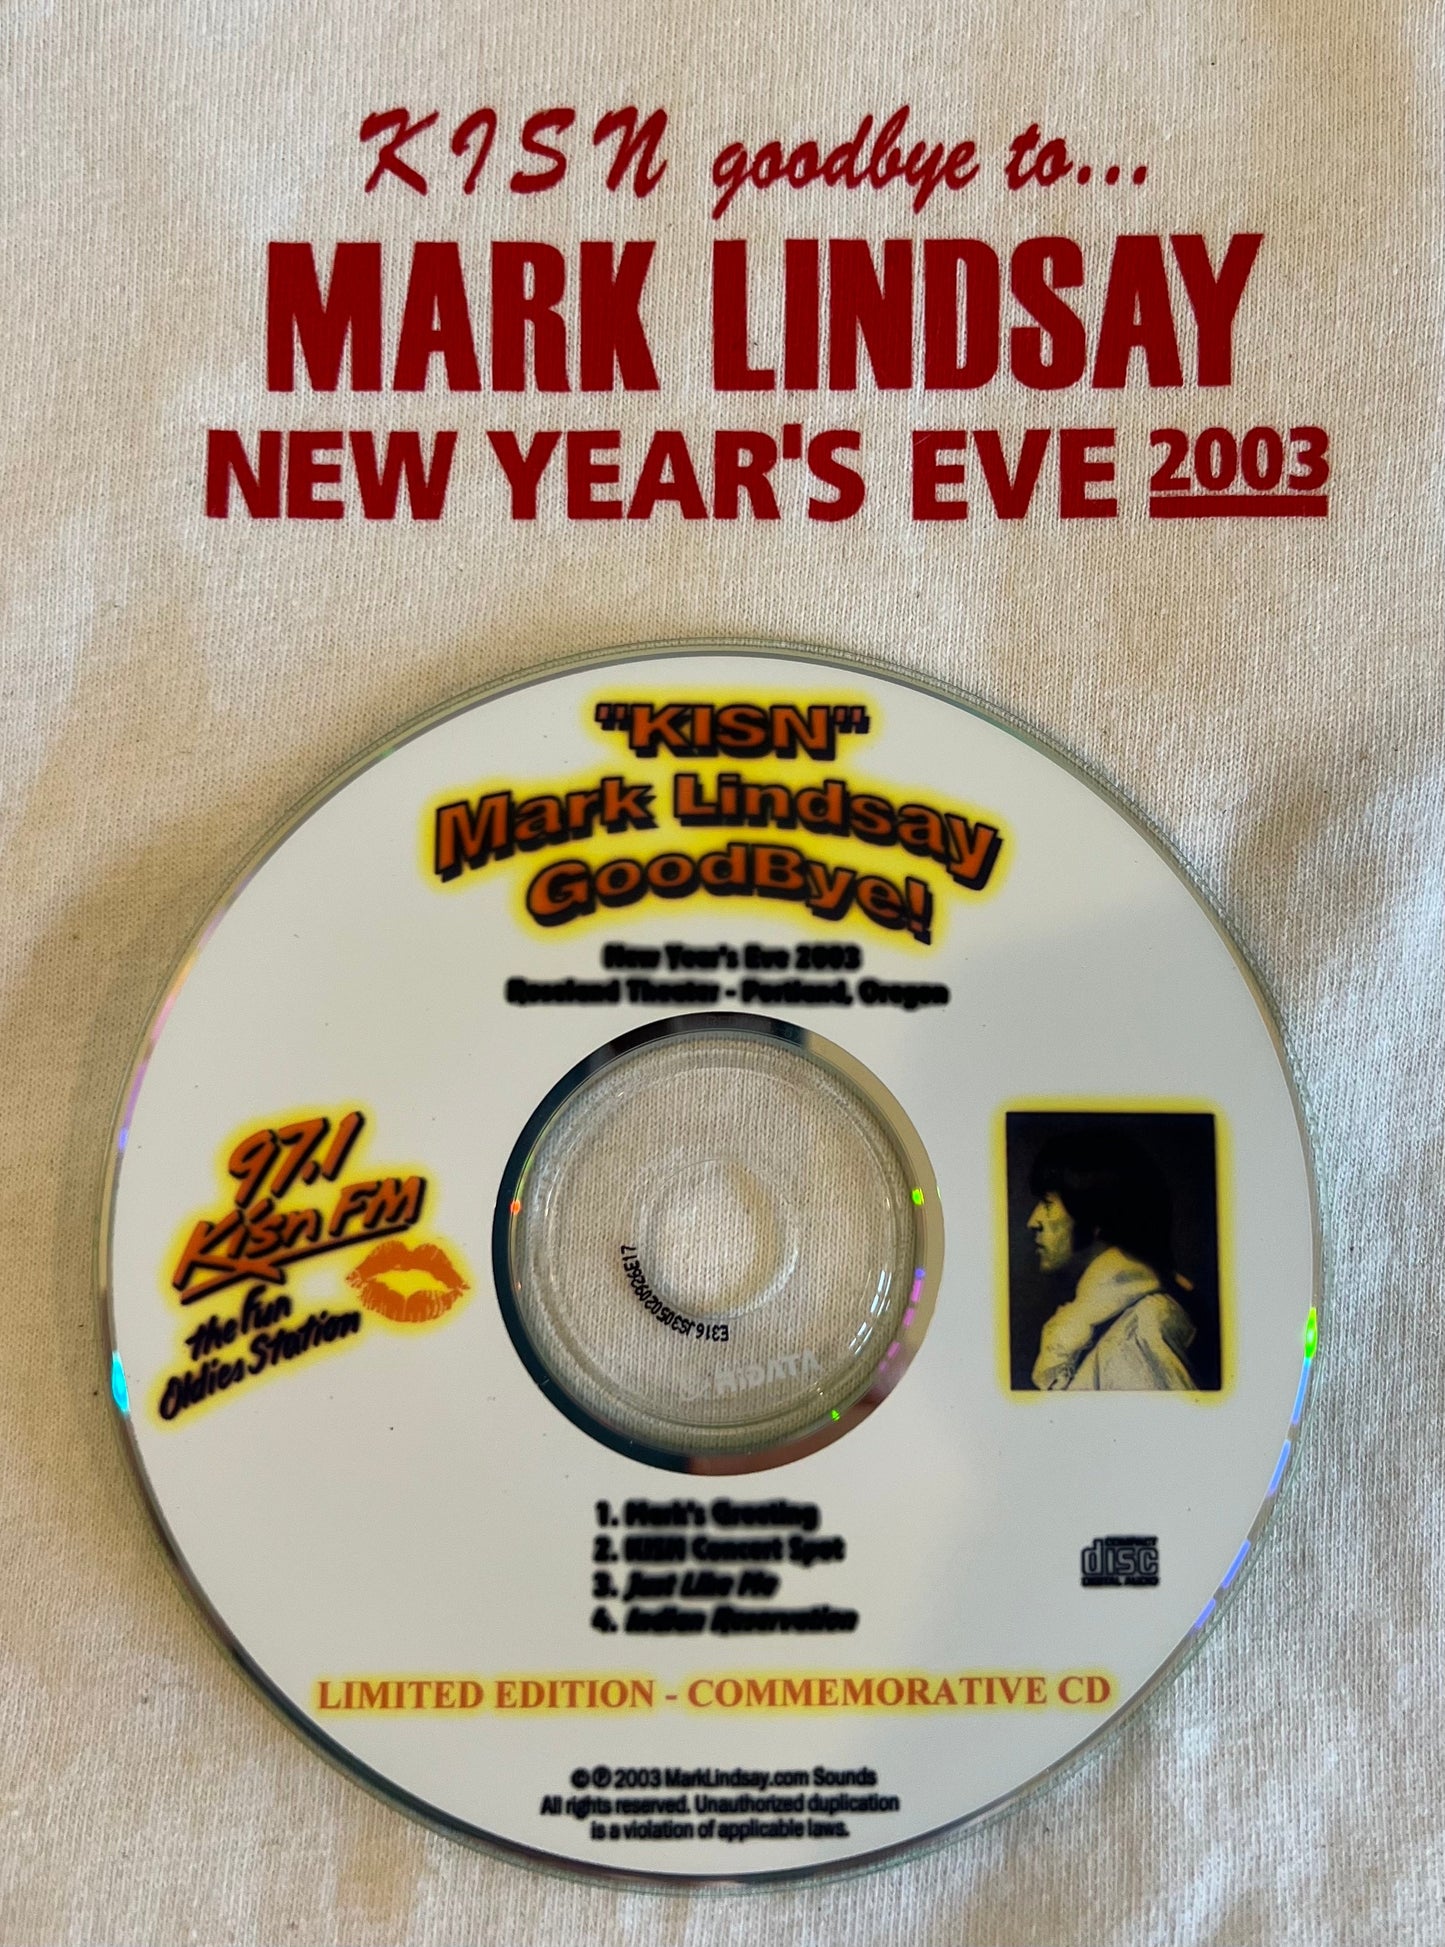 2003 New Year's Eve T-Shirt Ladies Size XL + Ltd Ed Promo CD + New Year's Card - Personally Autographed to YOU by Mark Lindsay